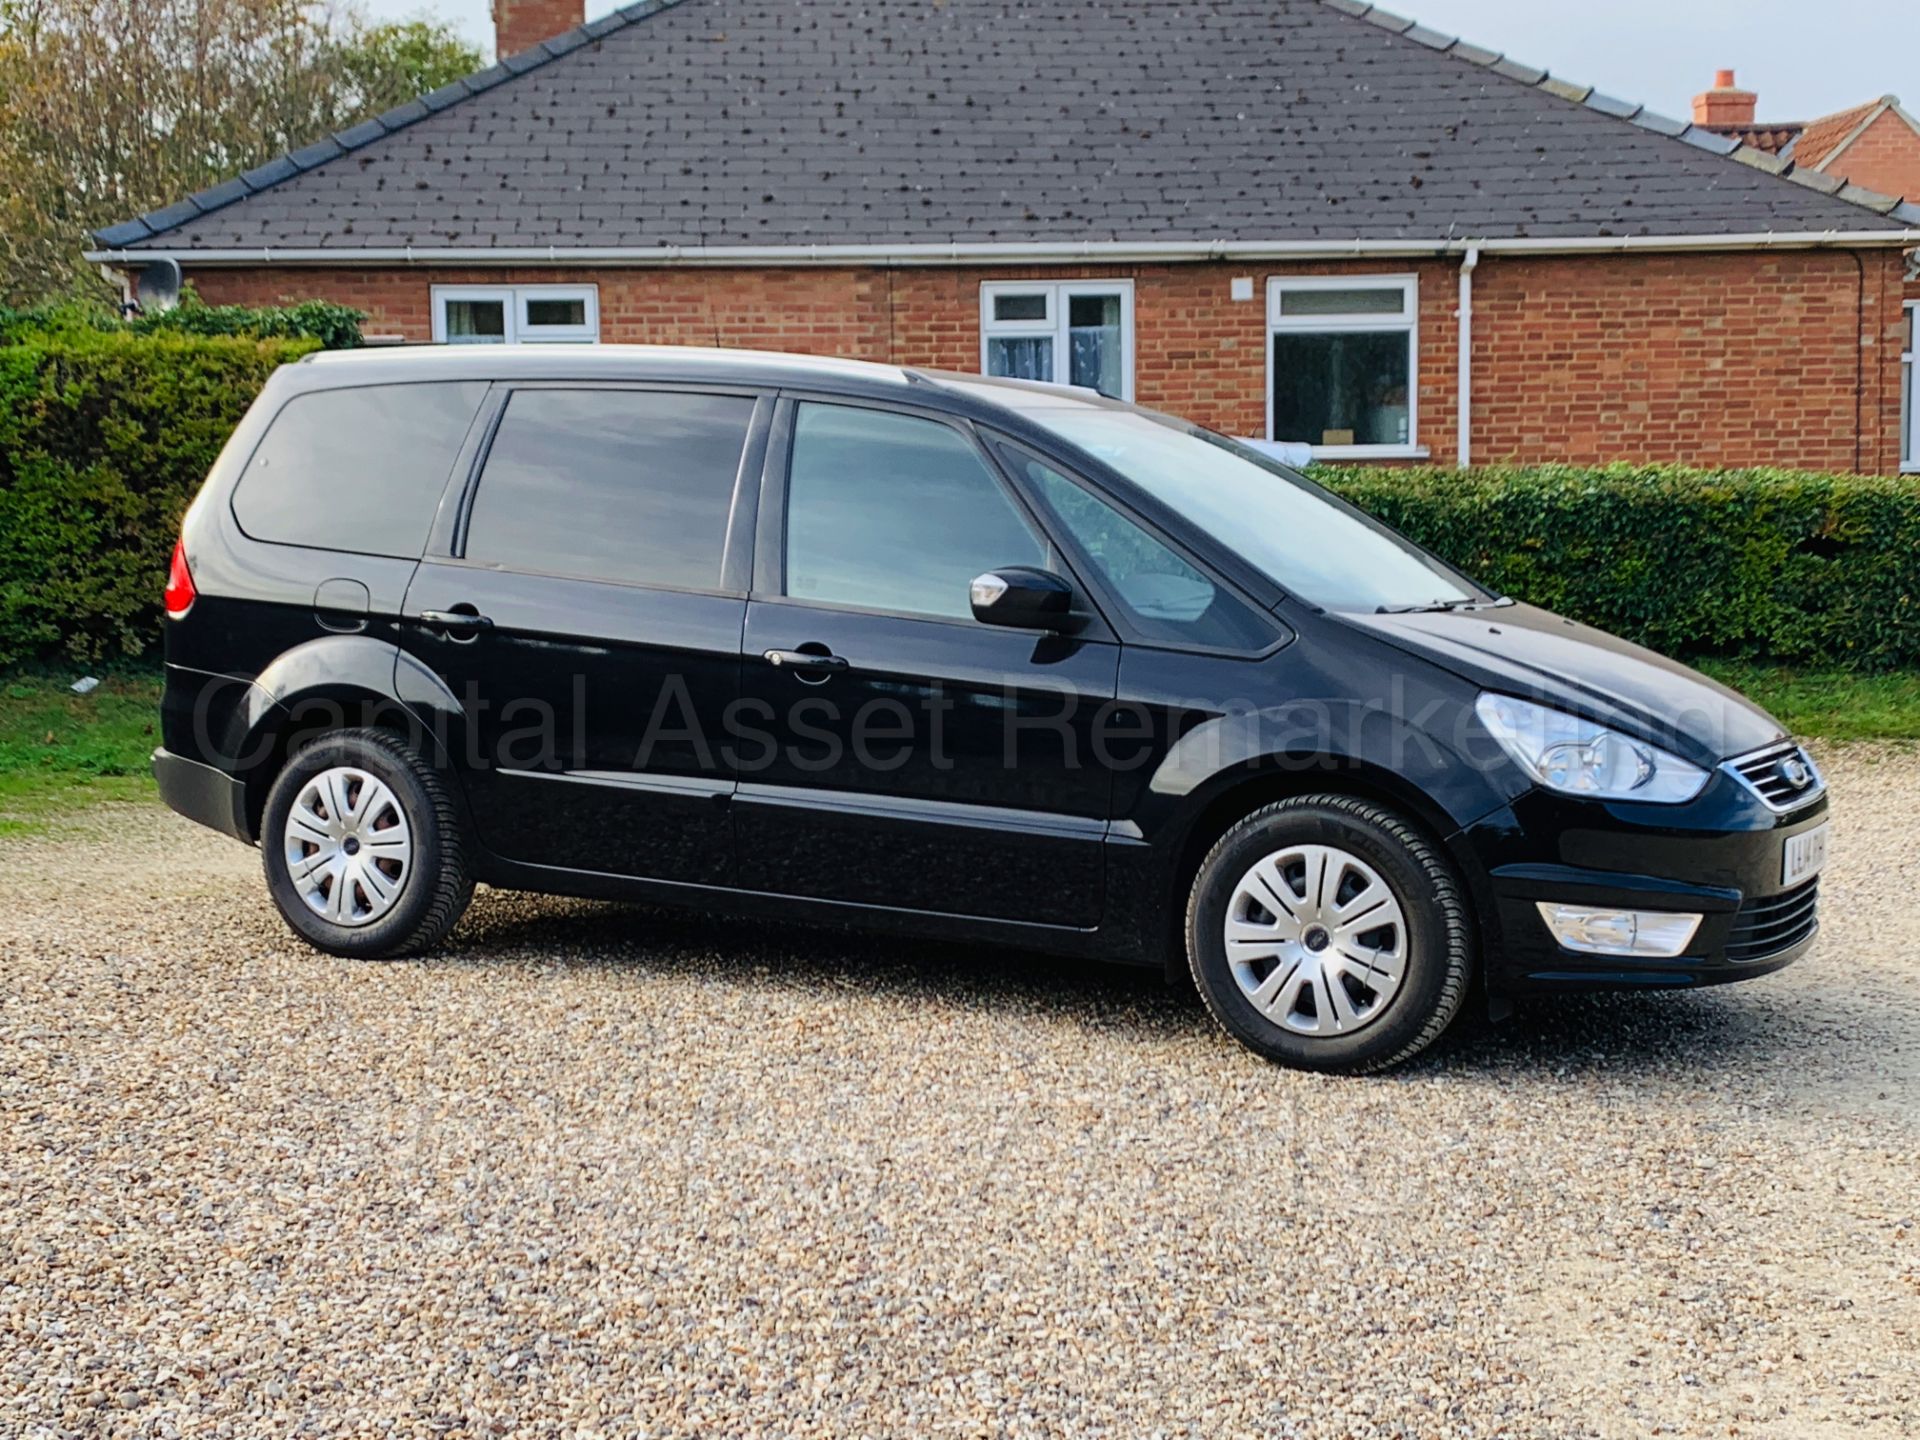 (On Sale) FORD GALAXY **ZETEC** 7 SEATER MPV (2014) 2.0 TDCI - 140 BHP - AUTO POWER SHIFT (1 OWNER) - Image 12 of 36